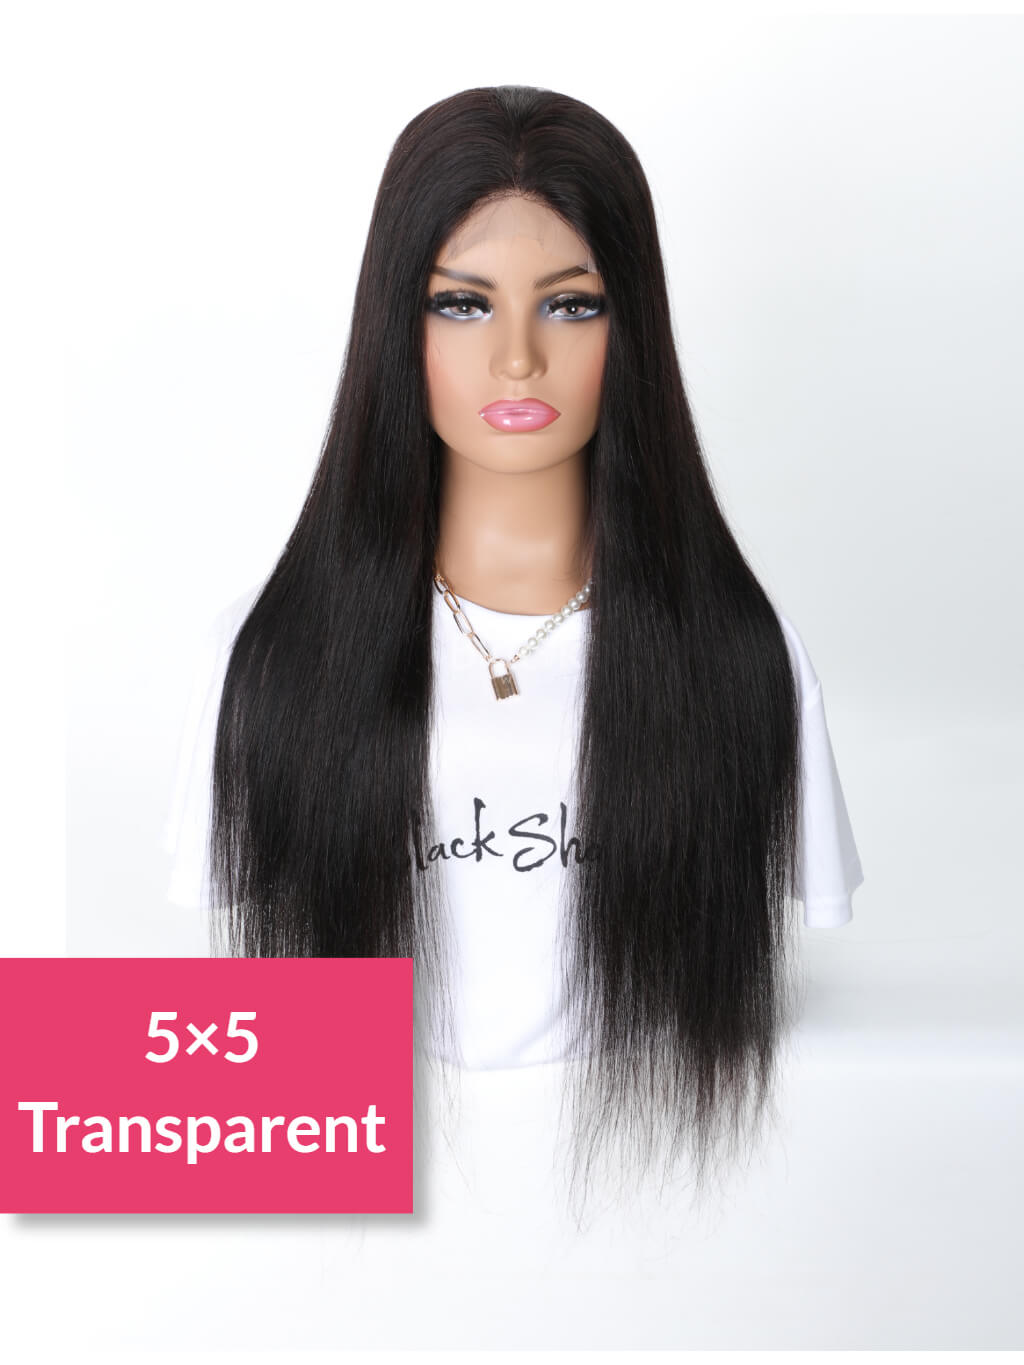 5x5 transparent lace closure wig straight hair 1